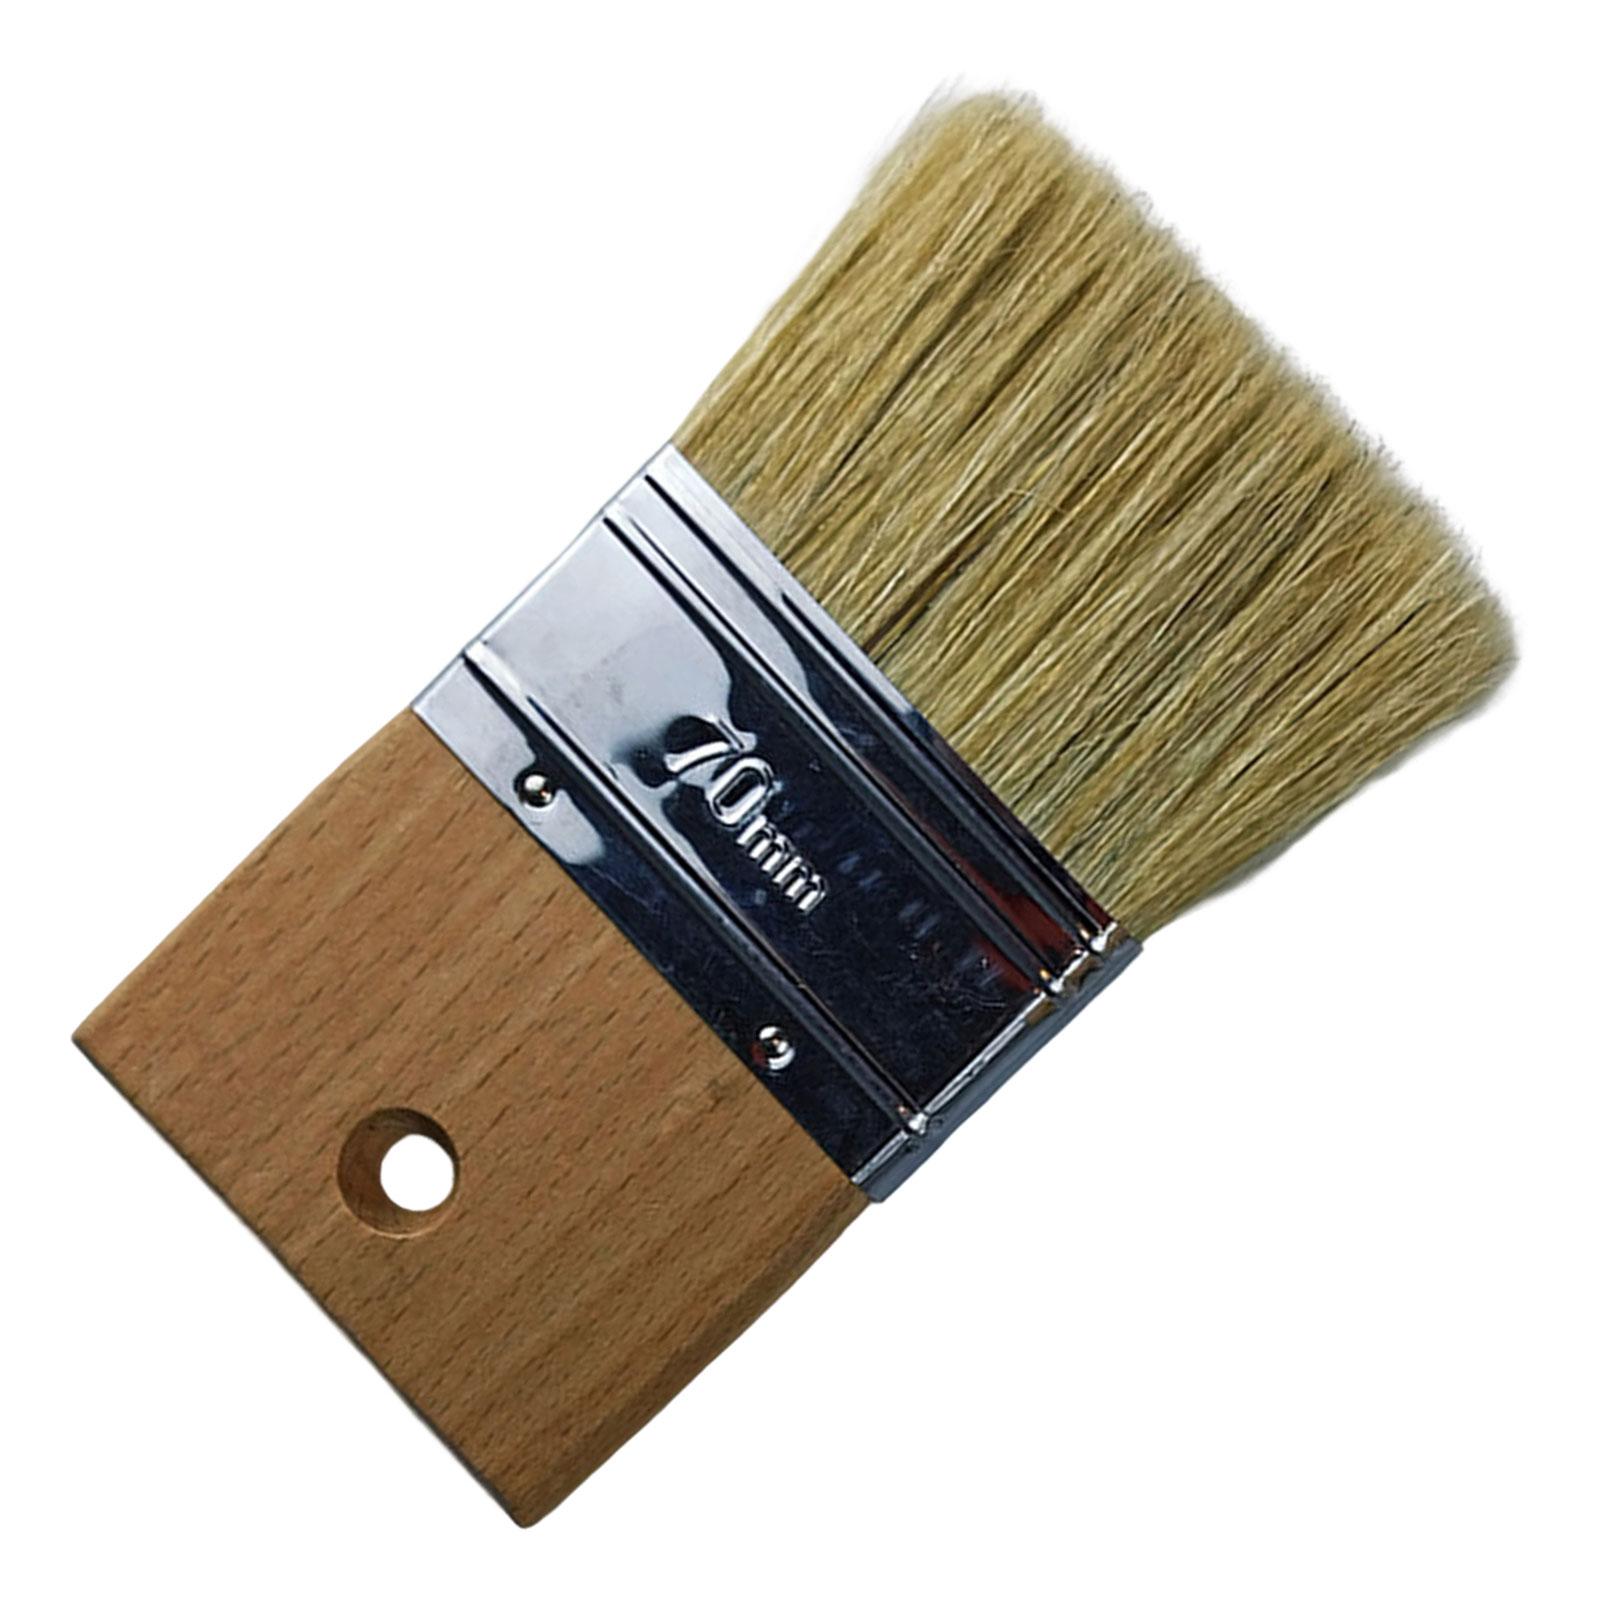 Paint Brush Large Professional Extra Wide Art Paint Brush Stain Brushes Household Paint Brushes for Fence Furniture Wood Walls Art Supplies 3inch